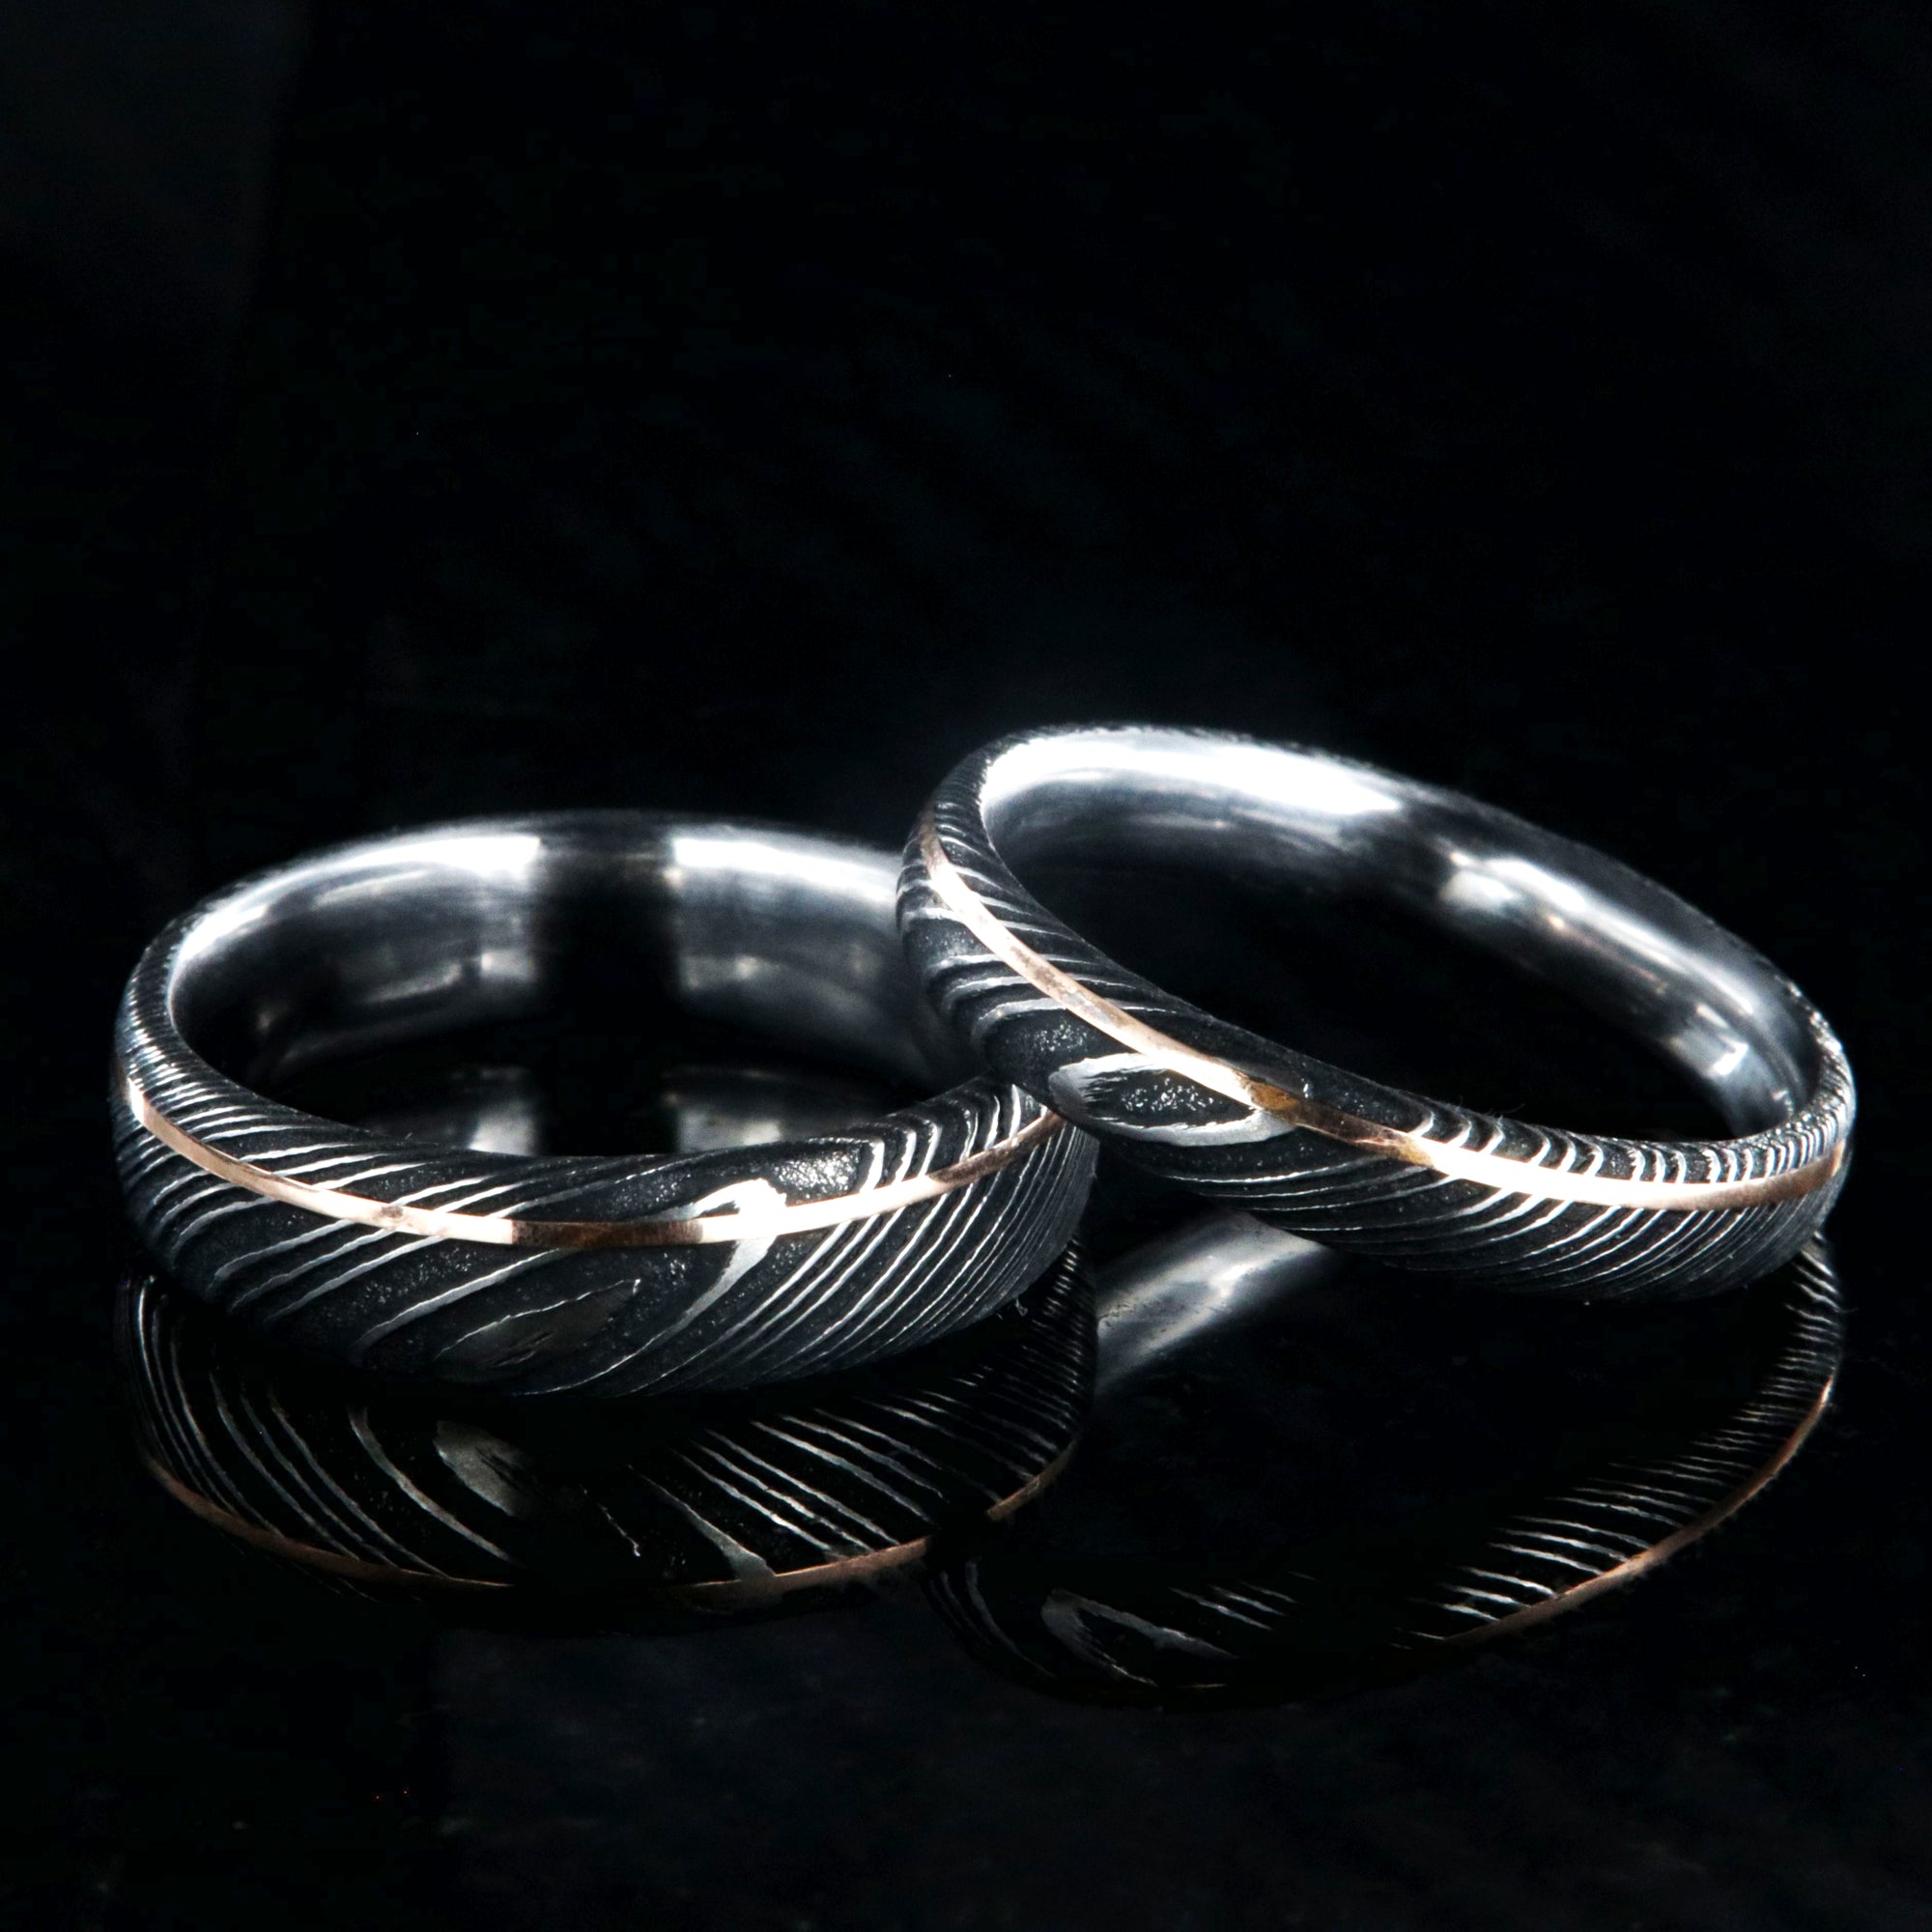 6mm and 4mm wide matching Damascus steel wedding bands with a ultra-narrow rose gold inlay